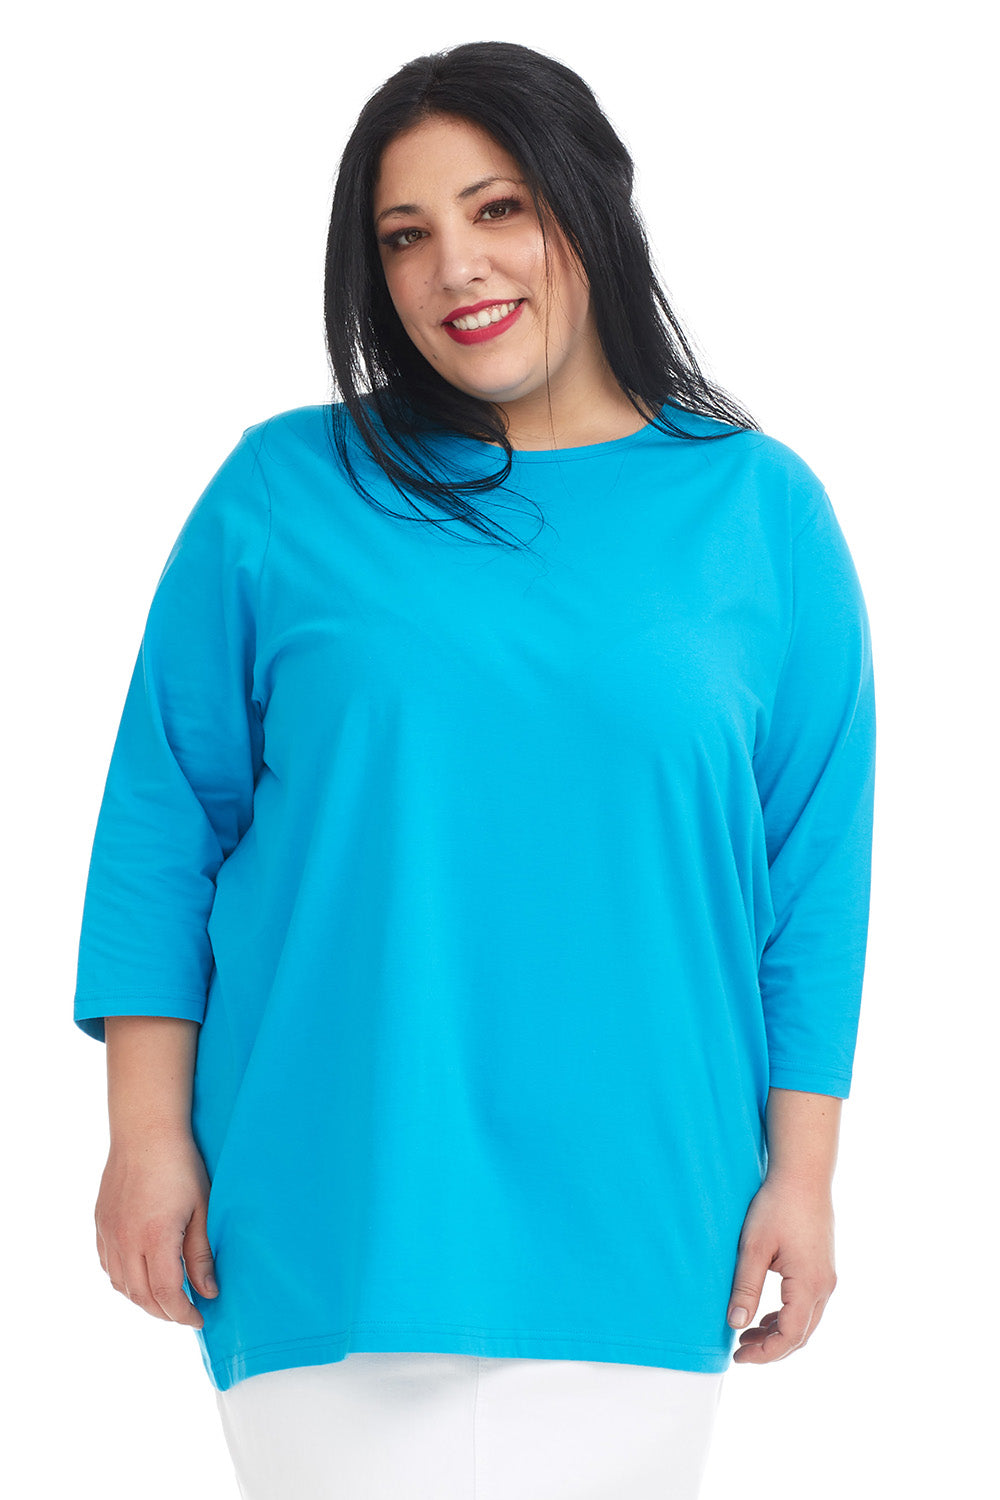 vibrant Blue oversized loose comfortable tee for plus size women